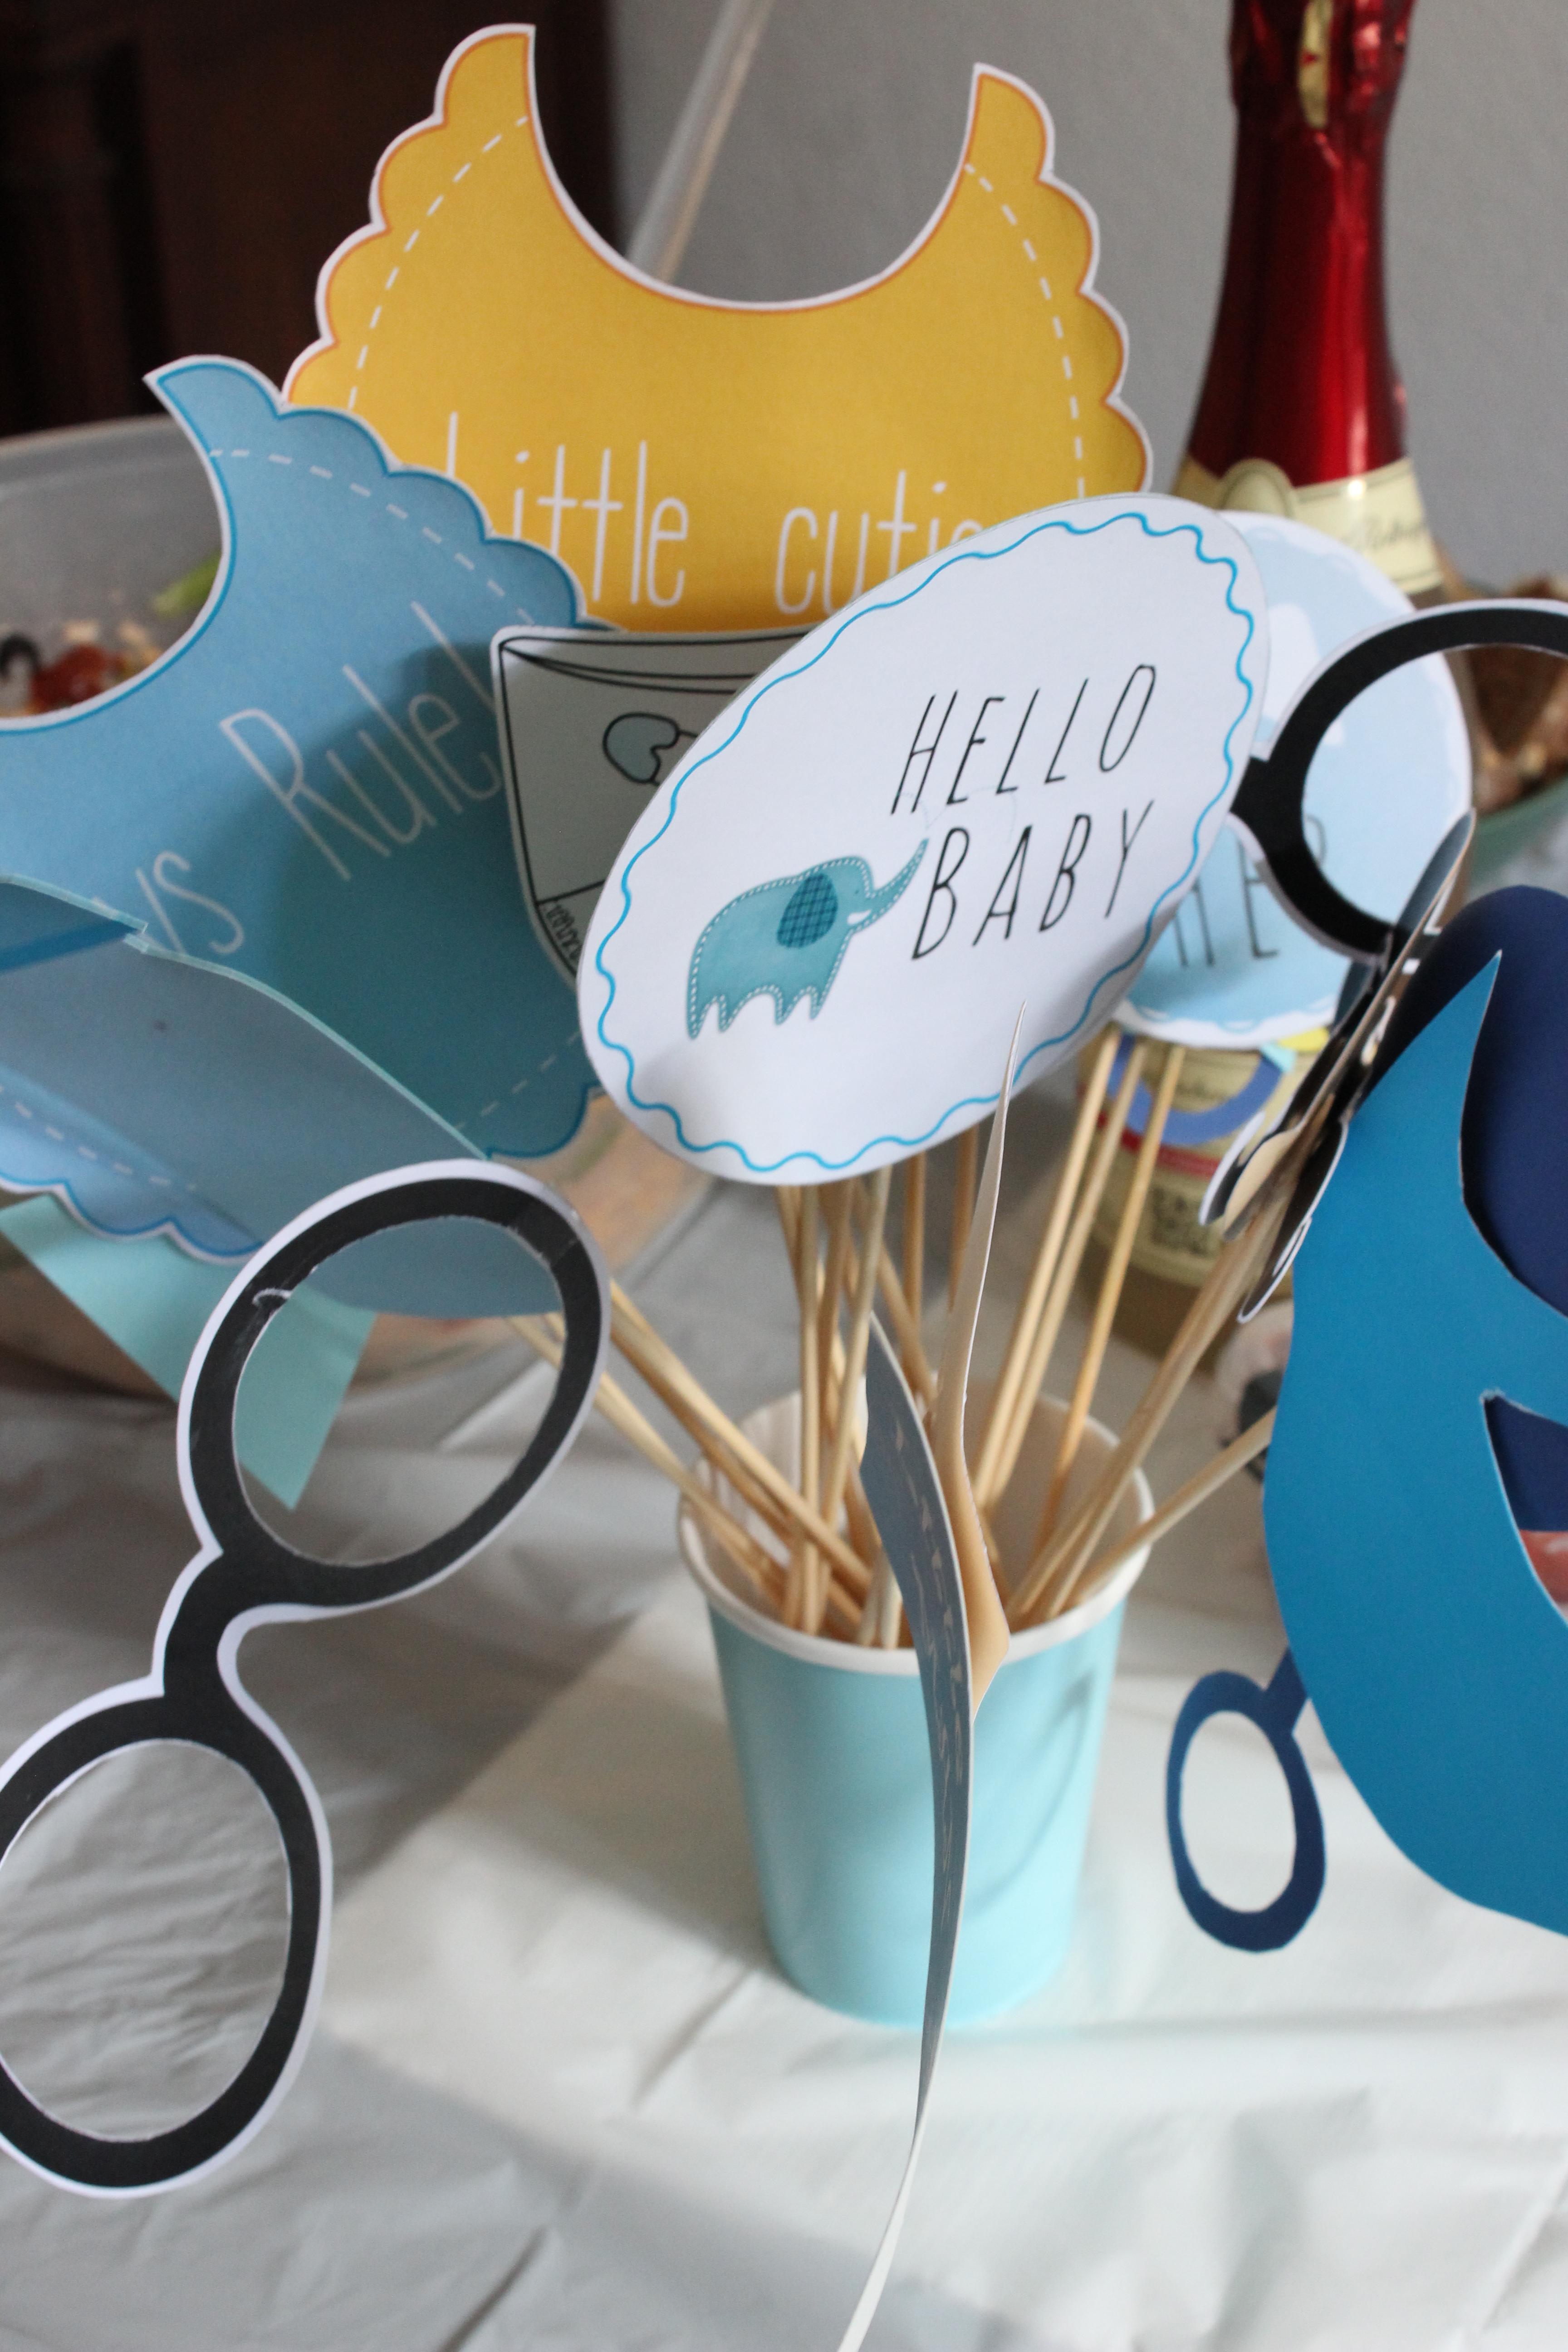 Babyshower Photo Booth Props